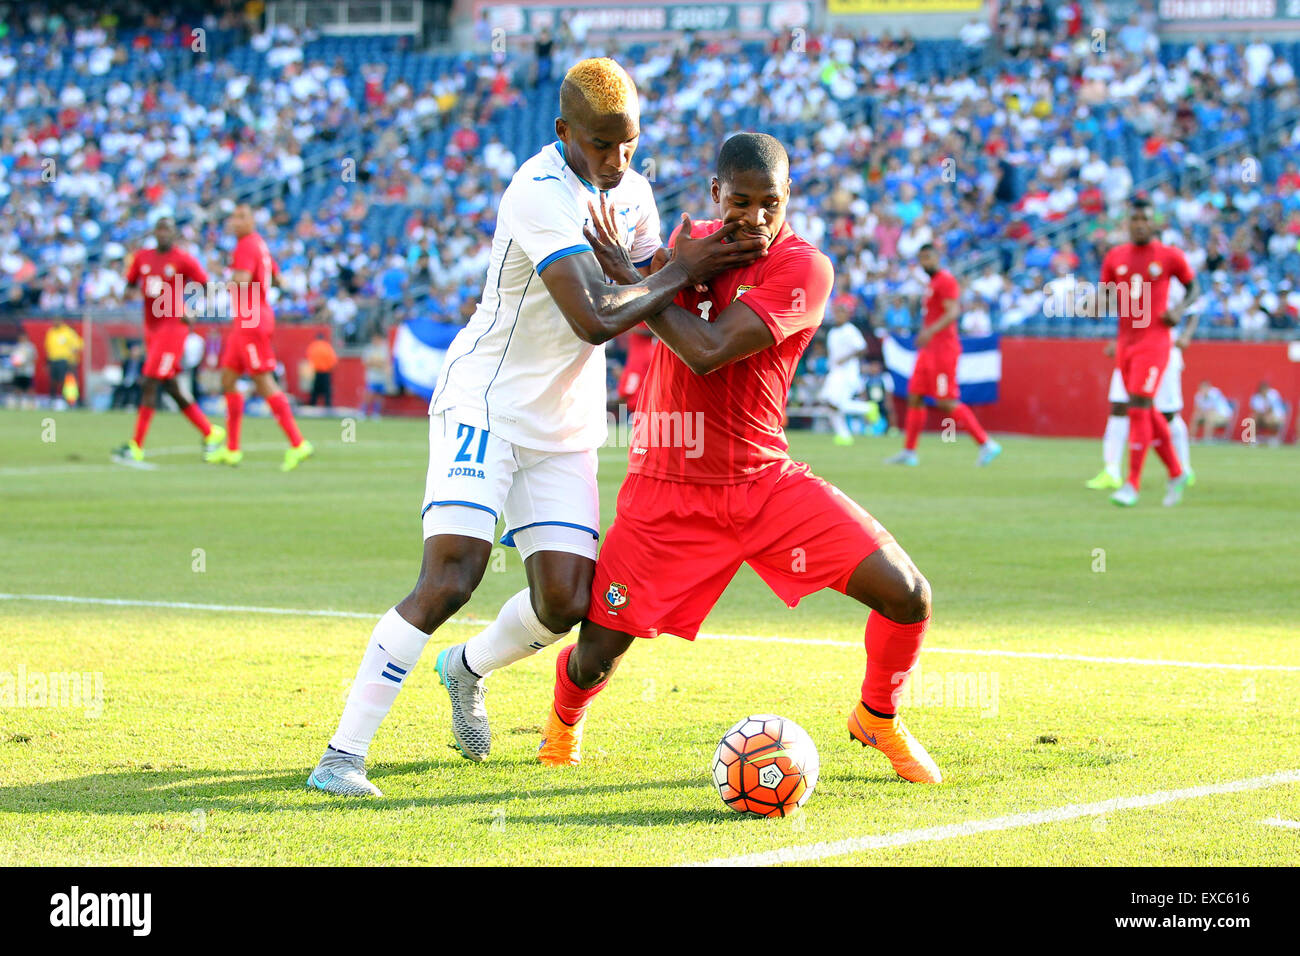 July 10, 2015; Foxborough, MA, USA; Honduras defender Brayan Beckeles (21) and Panama midfielder Armando Cooper (11) battle for the ball during the first half of the CONCACAF Gold Cup match between Panama and Honduras at Gillette Stadium. The match ended in a 1-1 tie. Anthony Nesmith/Cal Sport Media Stock Photo